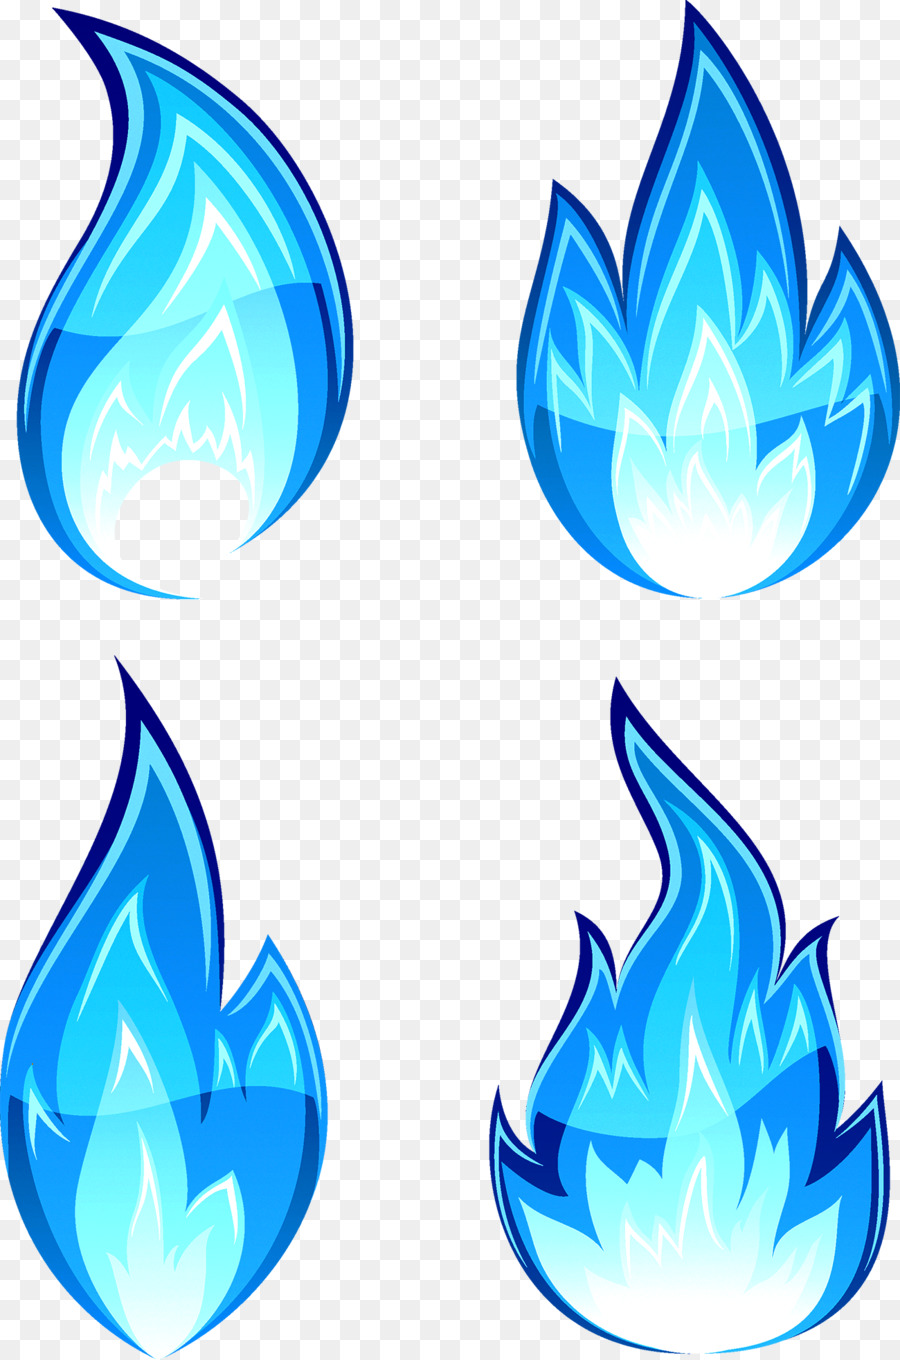 Flame Fire Drawing Clip art - Blue flame png download - 1300*1964 - Free Transparent Flame png Download.